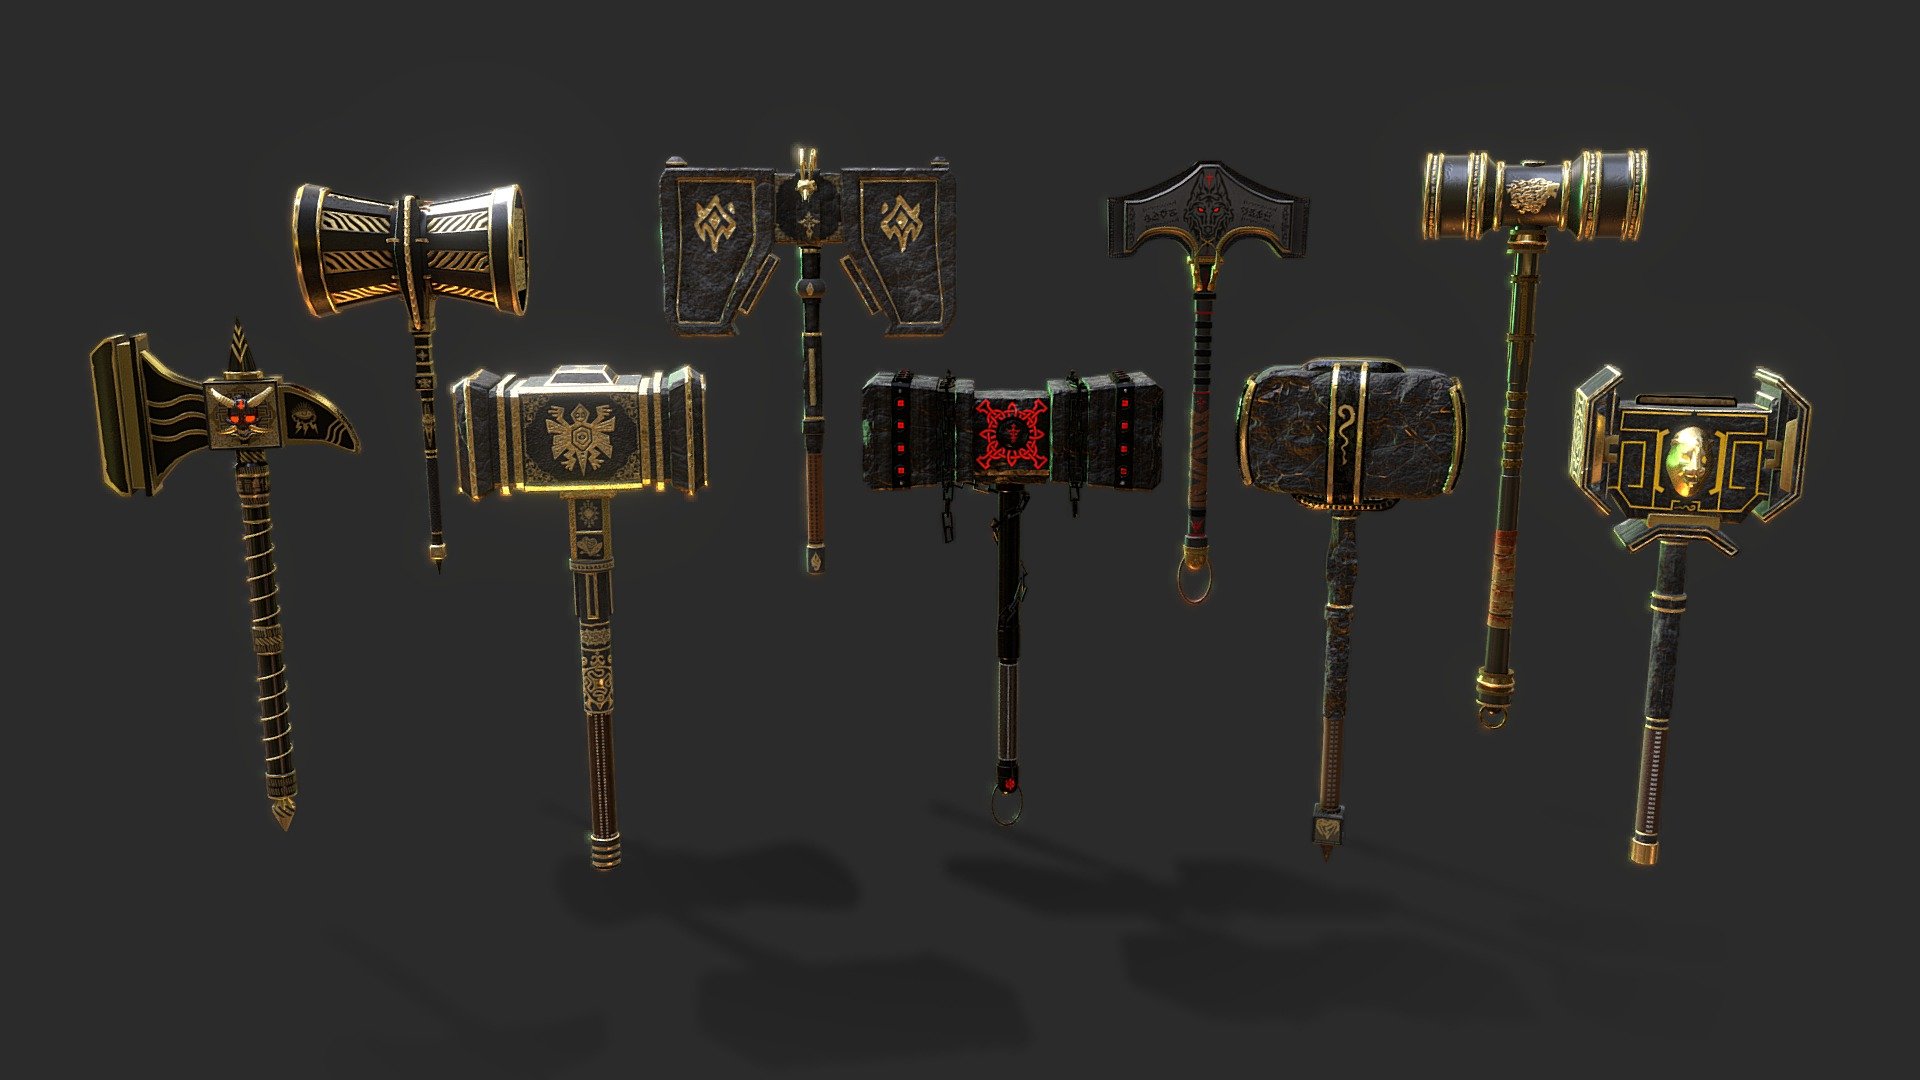 9 War Hammer Bundle 🔥⚒

Upon purchasing this package, you will receive:

9,  3D models in FBX format.
All models have UV maps and textures. 🧱
Low-poly clean topology, optimized for game and 3D software. 📺
All models have less than 10k polygons.
Created in Cinema4D, textured in Substance Painter, and rendered in Marmoset Toolbag. 📚📷

Included models:

Skull
Cage
Hawk
Bull
Chain
Wolf
Dragon
Dwarf
Lion - MW-9 War Hammer Bundle - Buy Royalty Free 3D model by Team2030 3d model